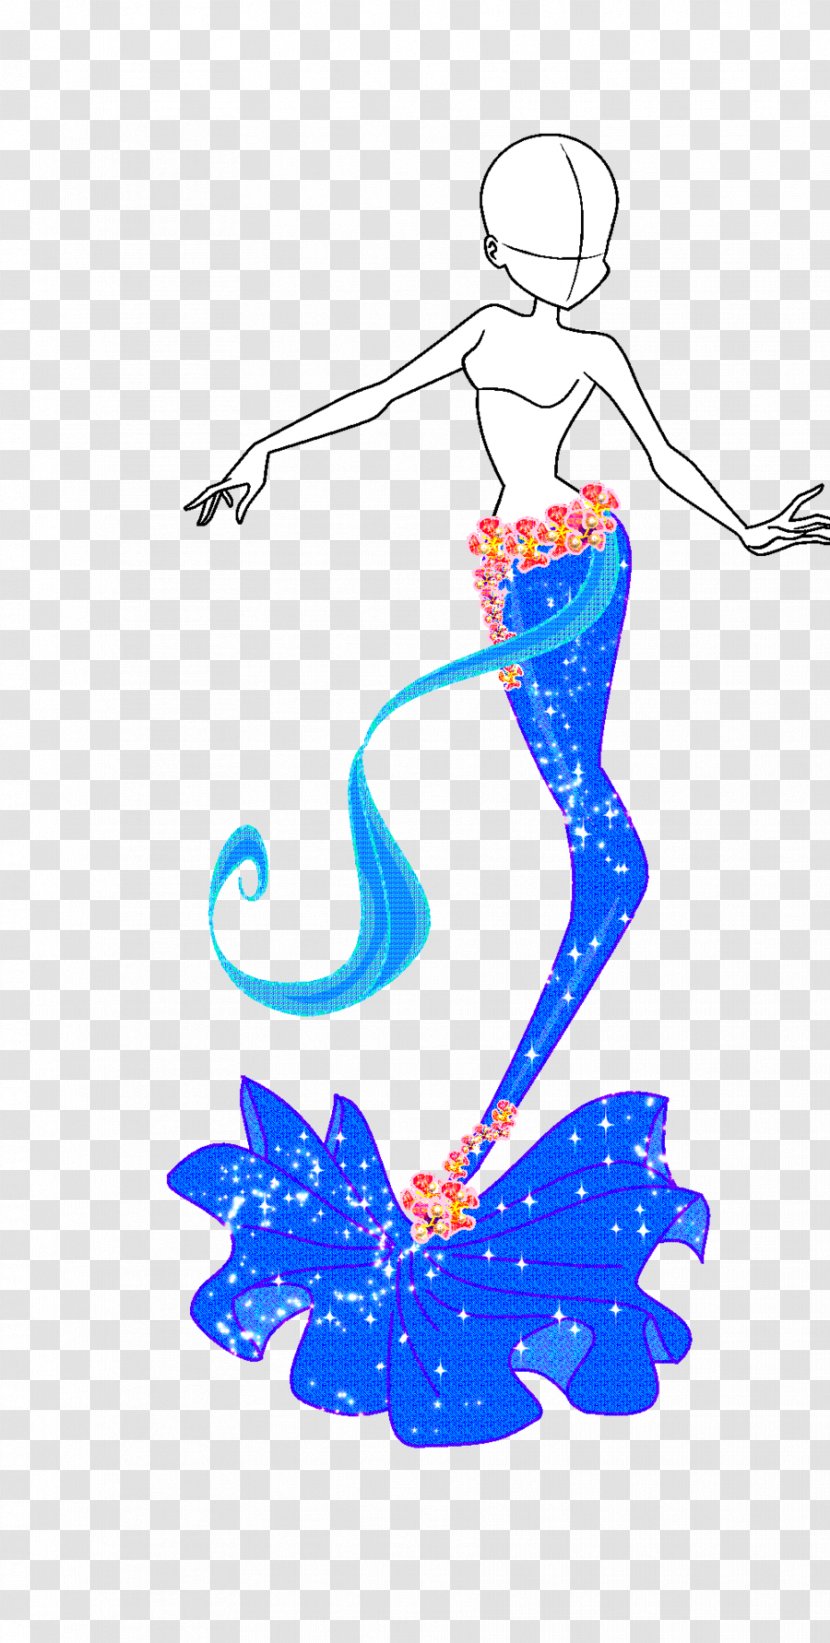 Art Clothing - Costume - Mermaid Tail Transparent PNG